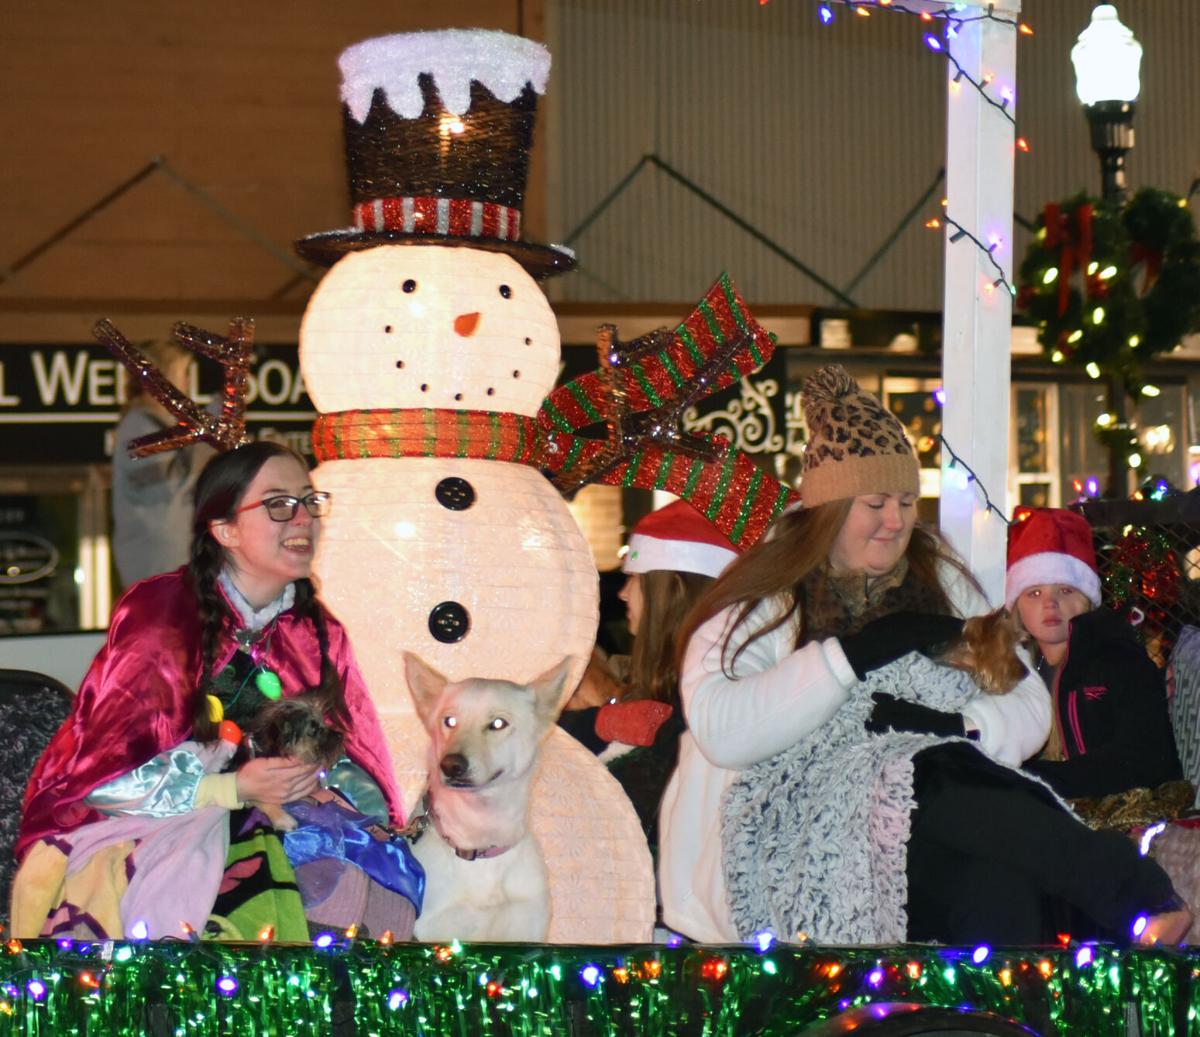 Council approves Christmas parade date, sidewalk bid request